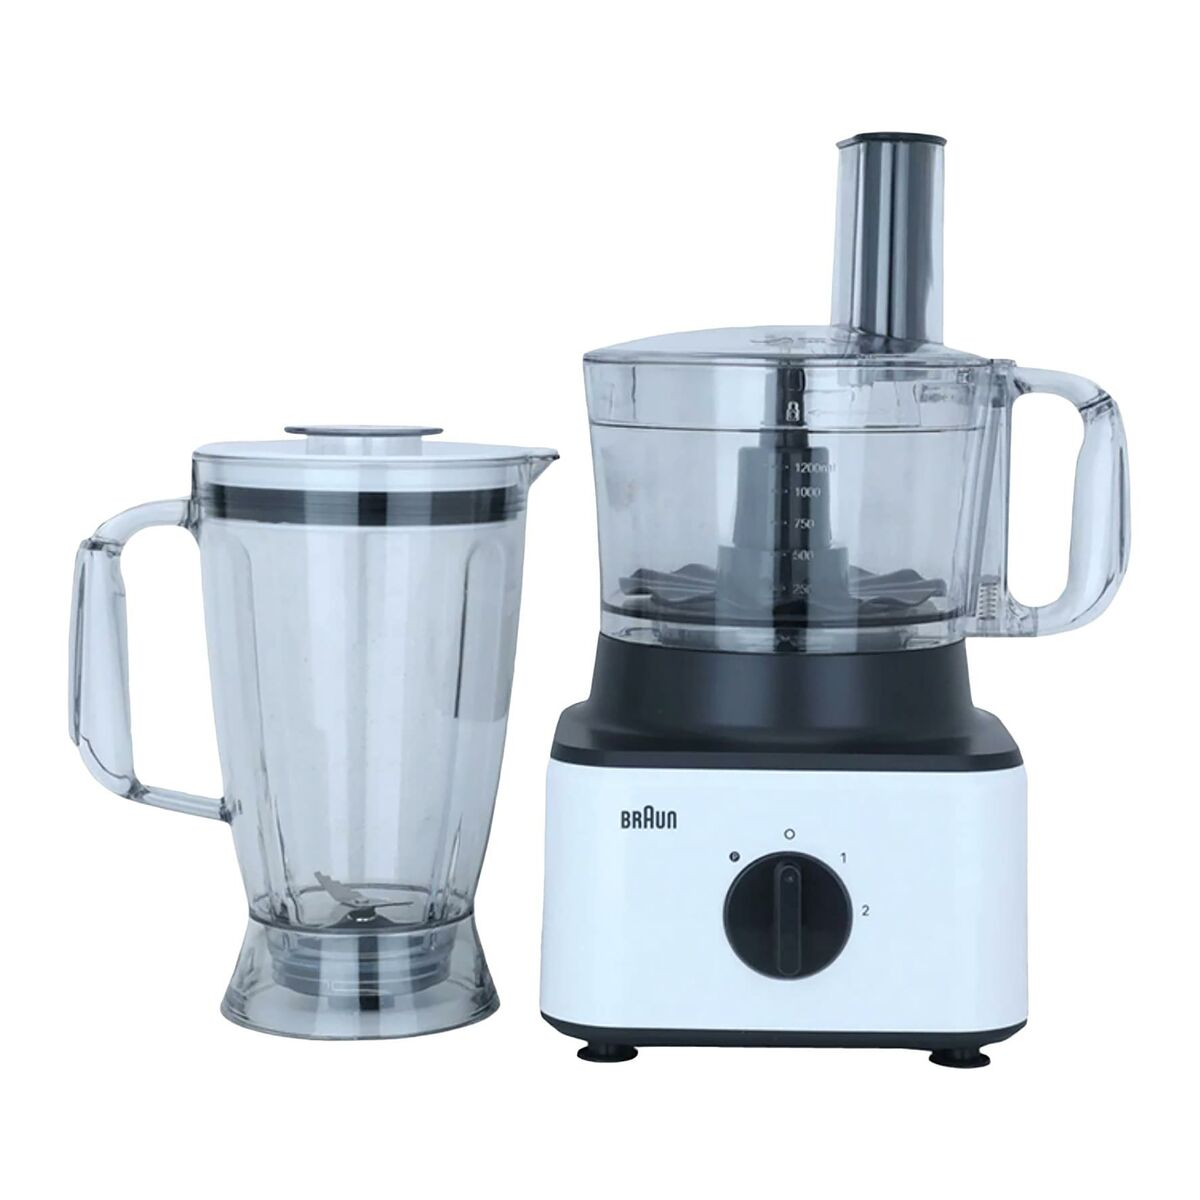 Braun Food Processor, 8 In 1, Compact Design, 750 W, Two Speeds With Pulse Feature, 2.1 L Bowl, 1.8 L Juice Jug, White, Fp0132Wh